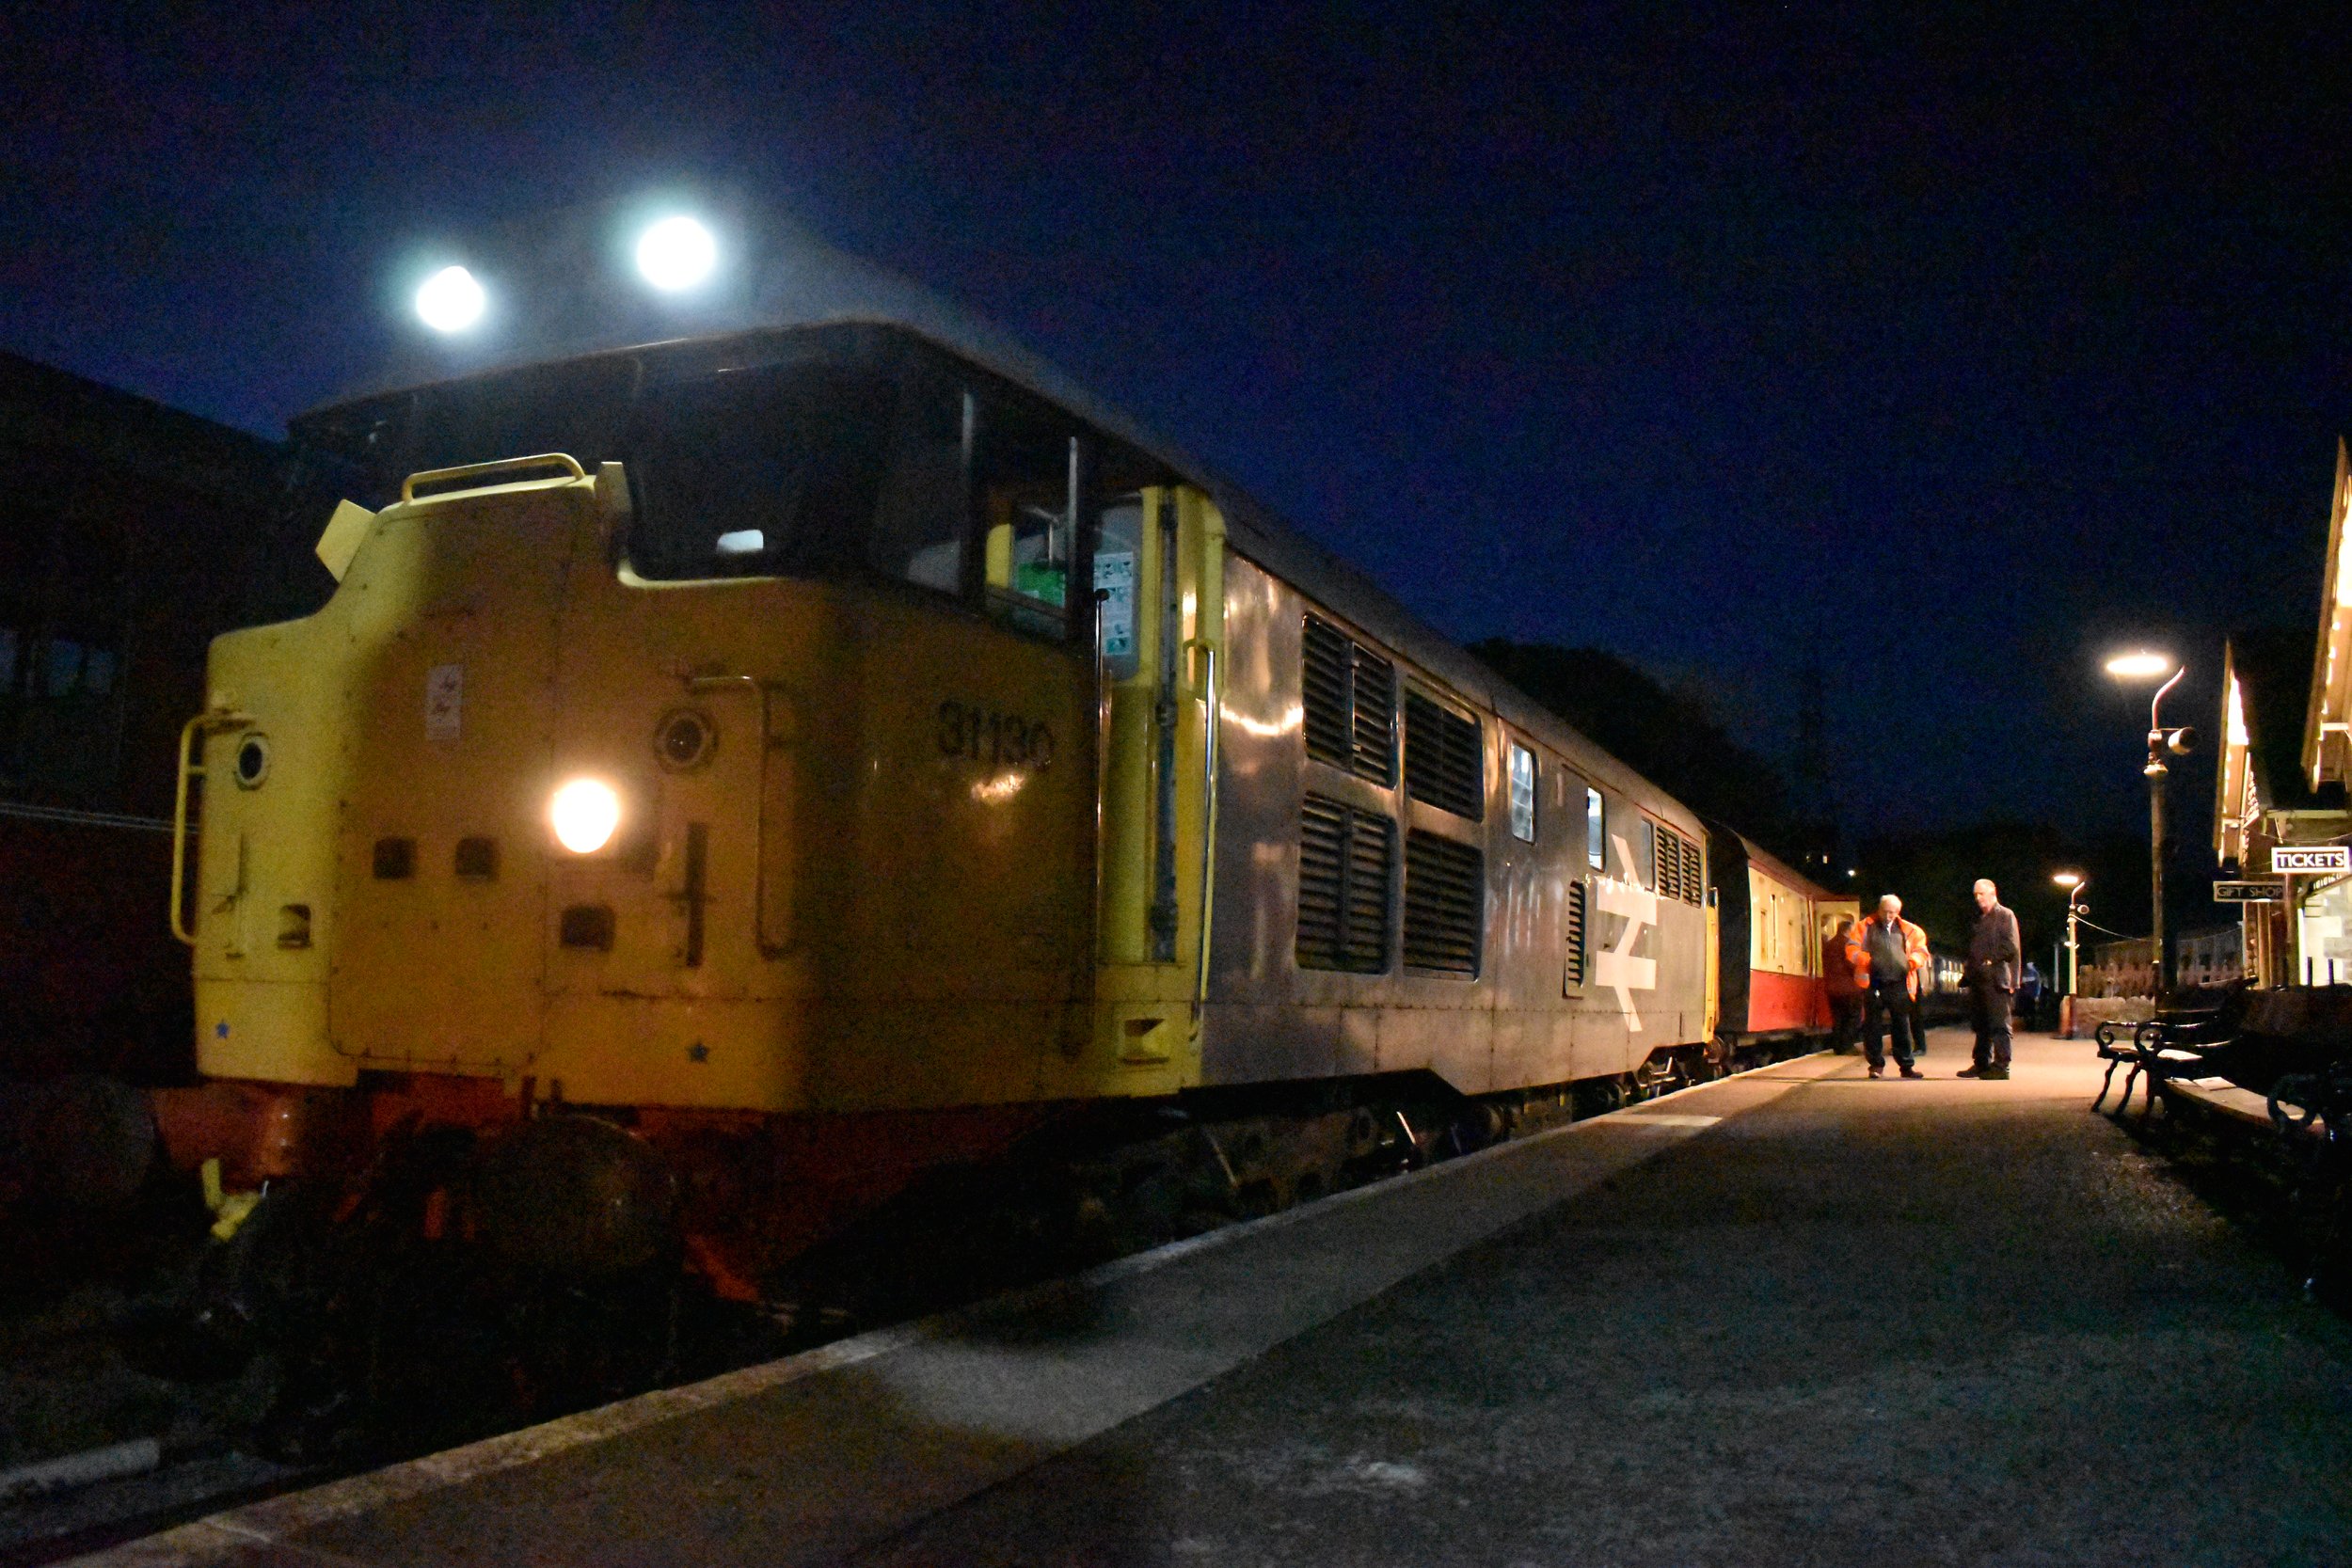  31130 waits to depart Bitton with an evening train on 21st October 2023. ©Adam Bryant 